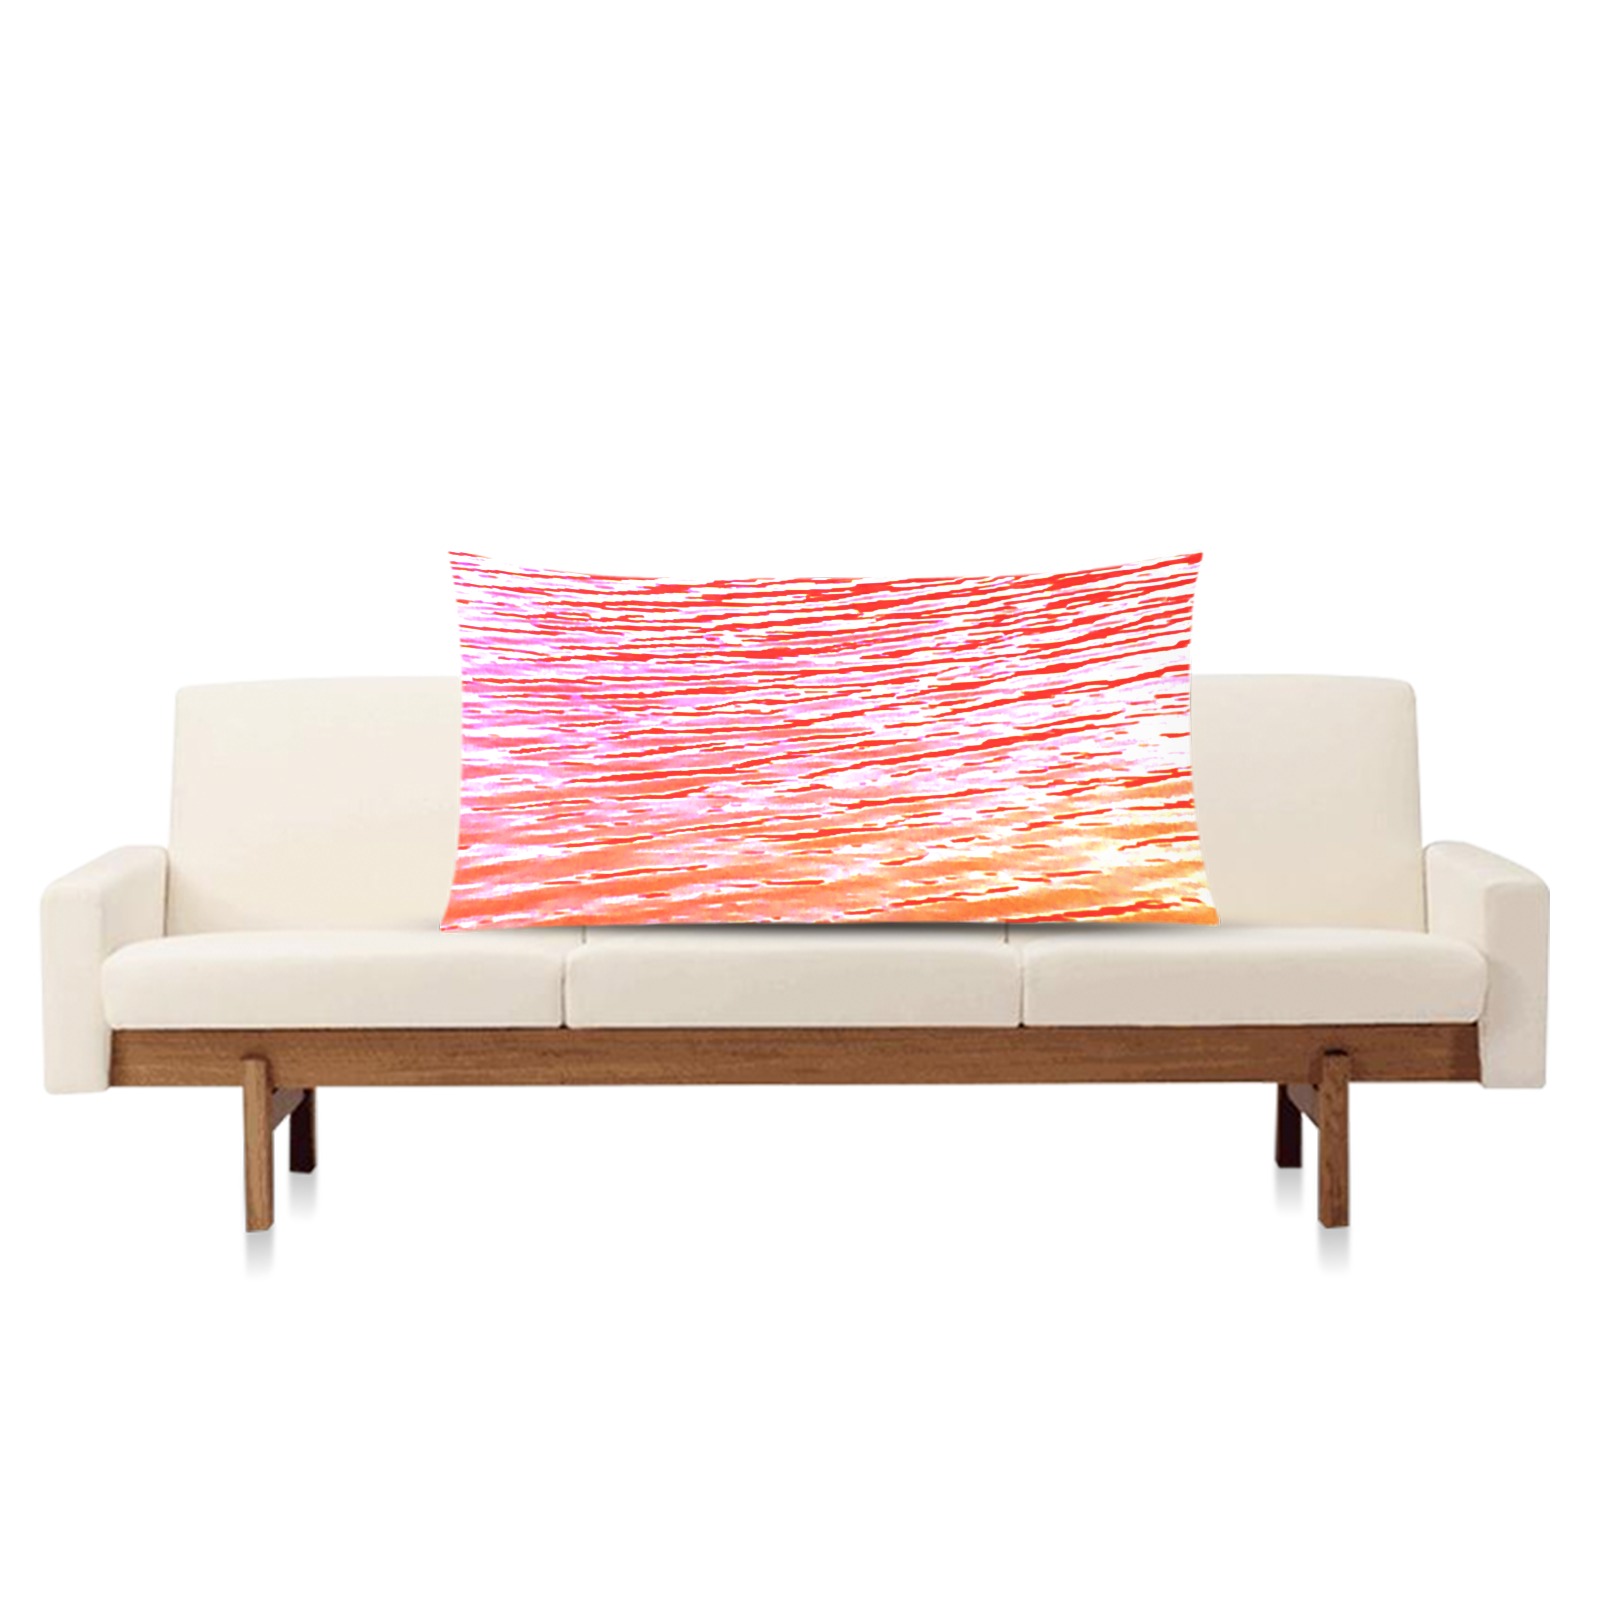 Orange and red water Rectangle Pillow Case 20"x36"(Twin Sides)